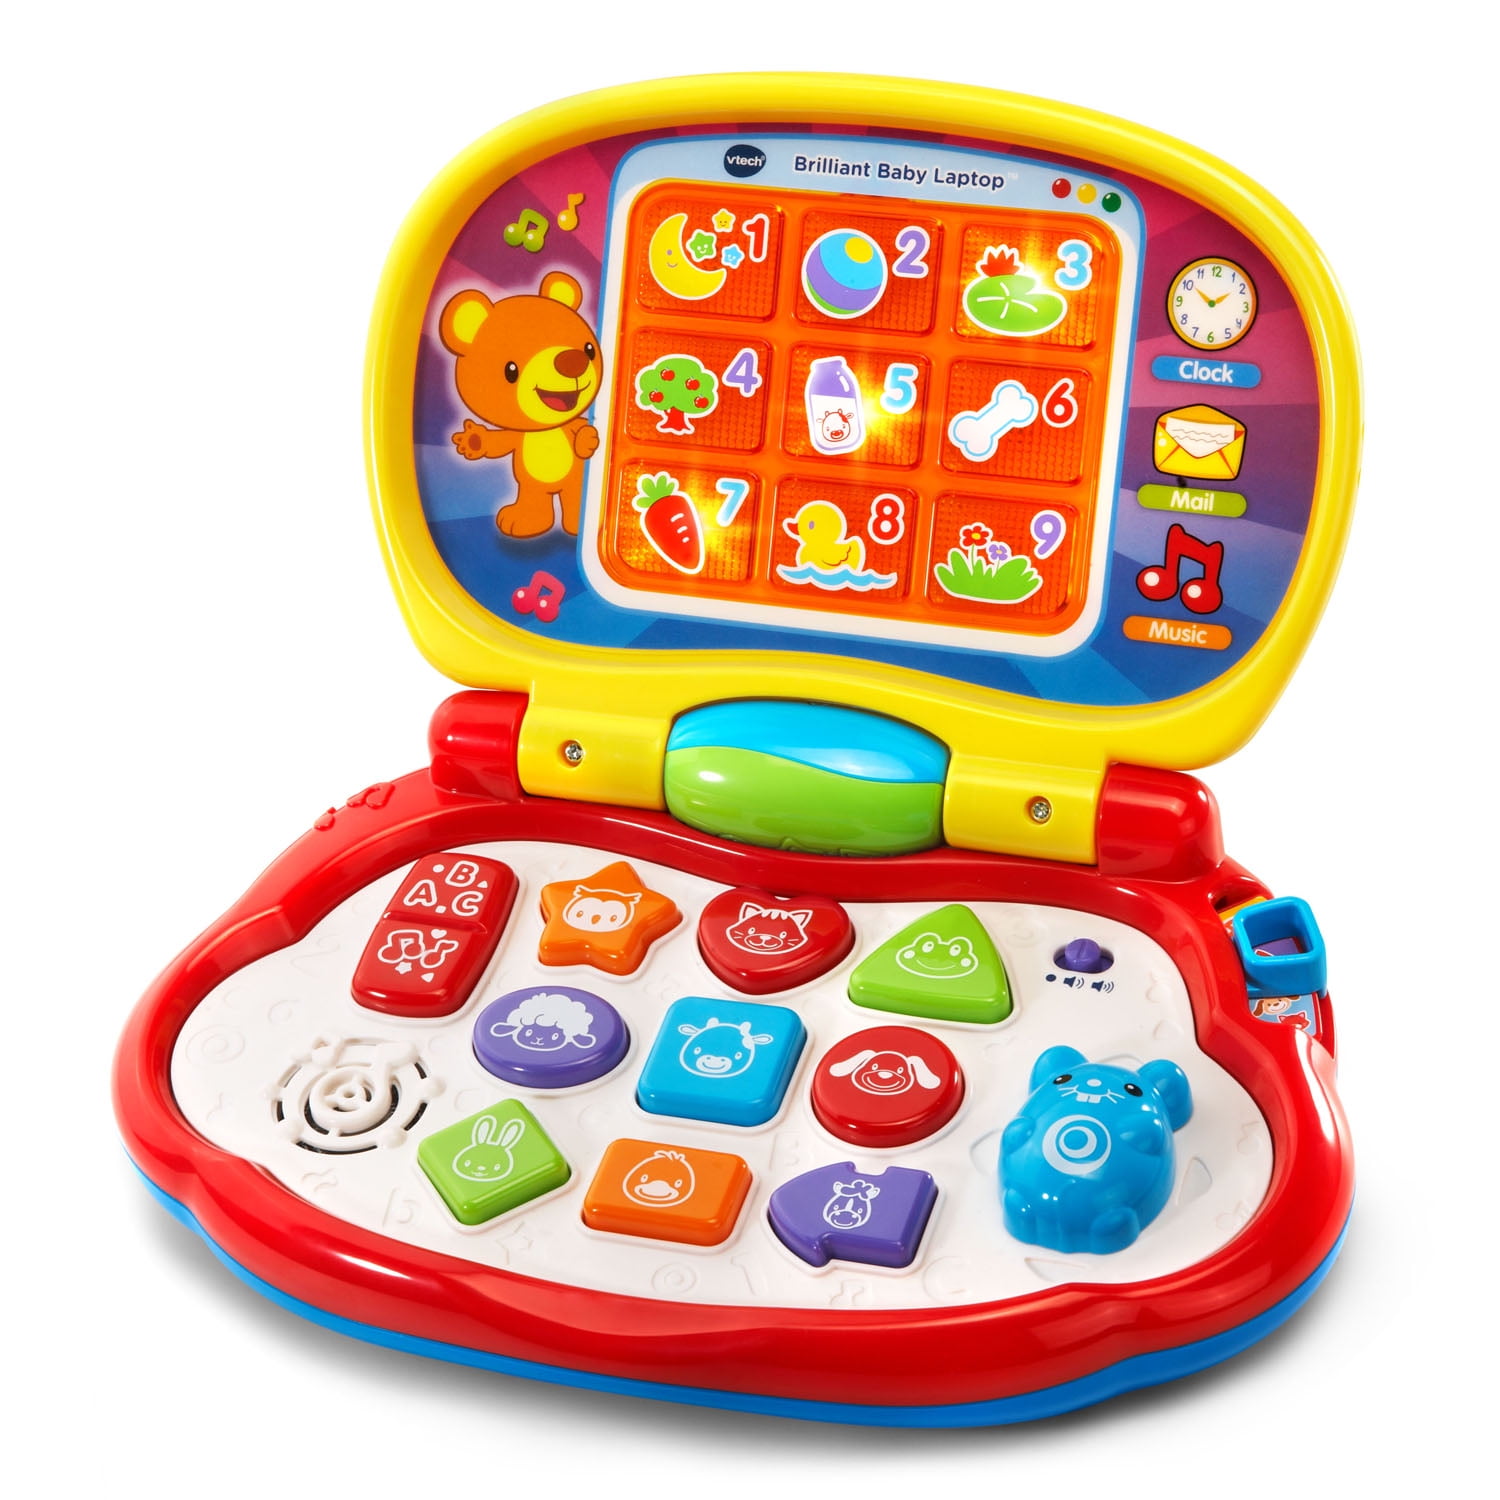 VTech Baby's Learning Laptop Toy Childrens Best Toy Gift For Kids 